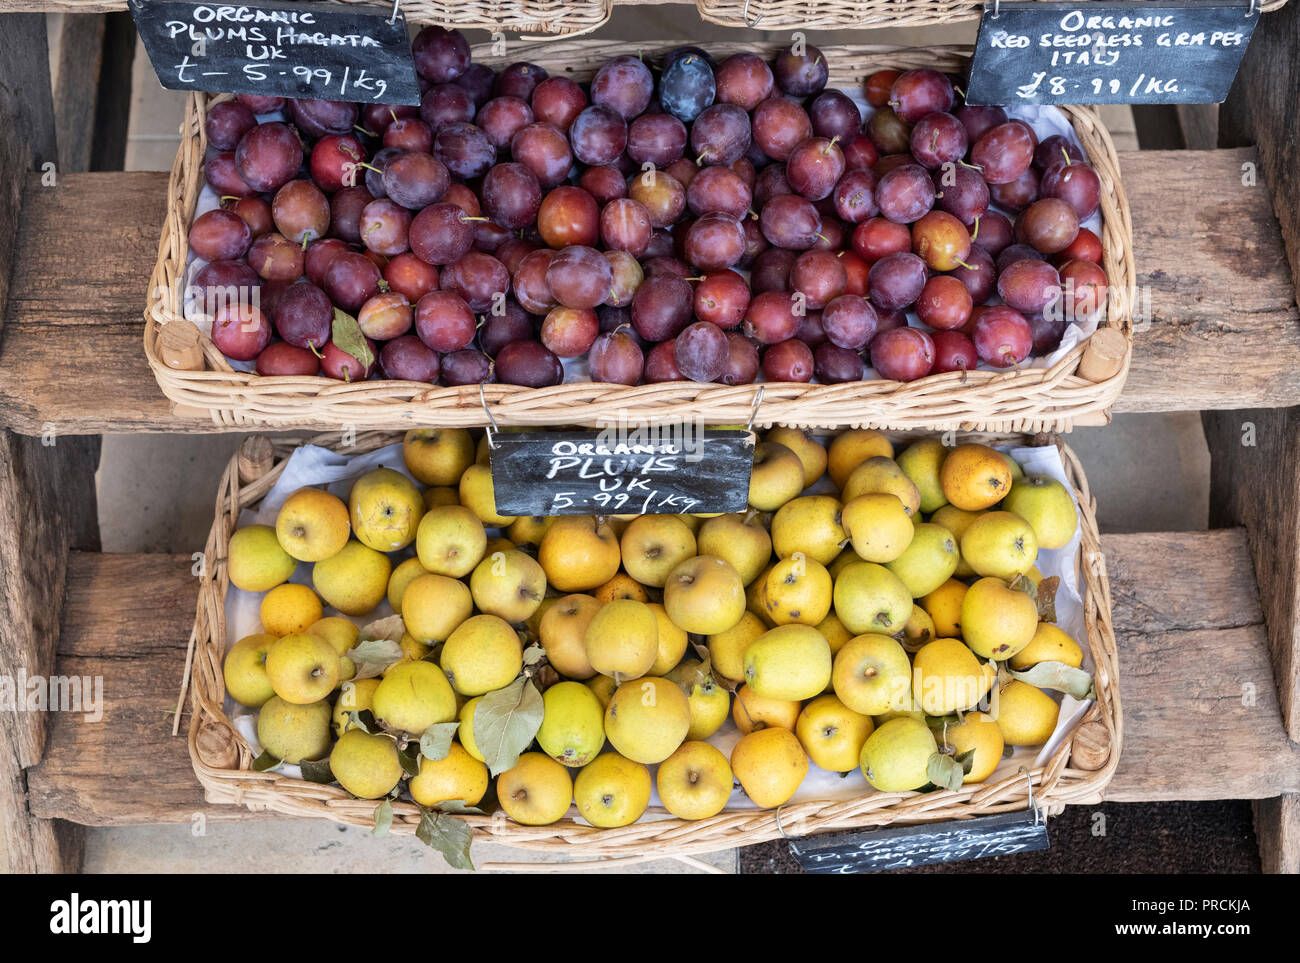 Organic plums and pitmaston pineapple apples for sale at Daylesford Organic farm shop autumn festival. Daylesford, Cotswolds, Gloucestershire, England Stock Photo